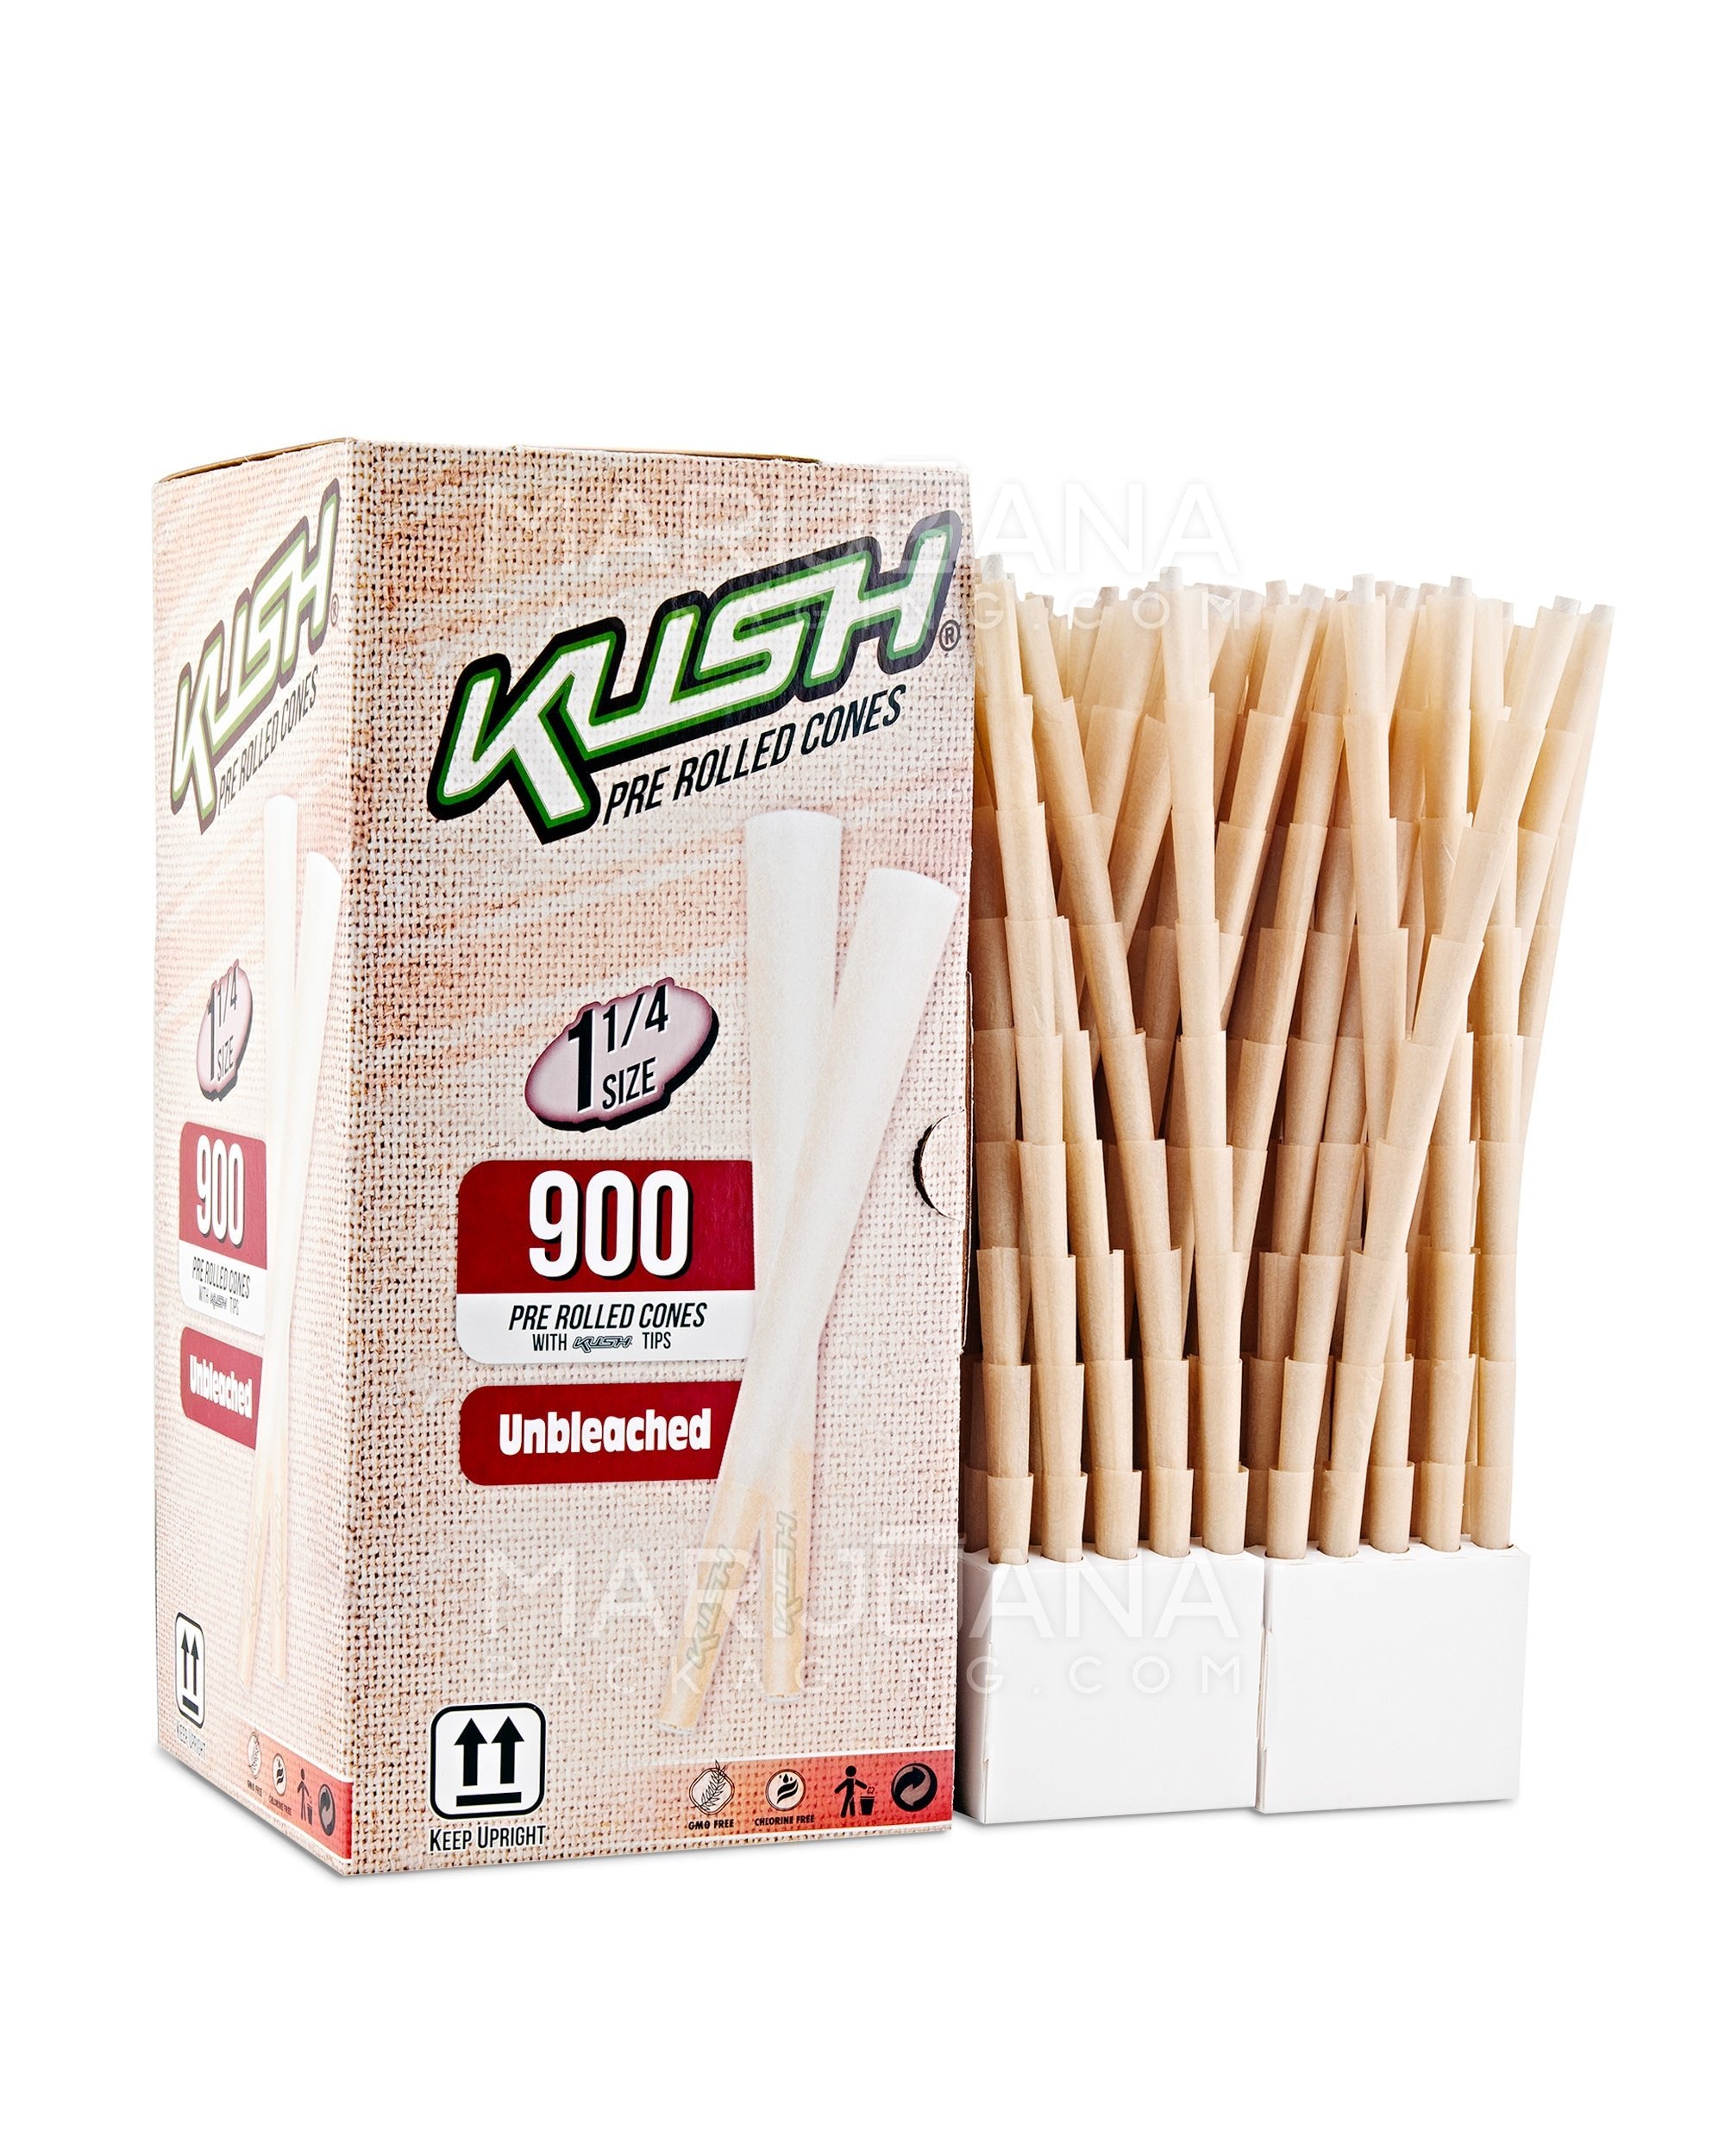 KUSH | Unbleached 1 1/4 Size Pre-Rolled Cones w/ Filter Tip | 84mm - Brown Paper - 900 Count - 2